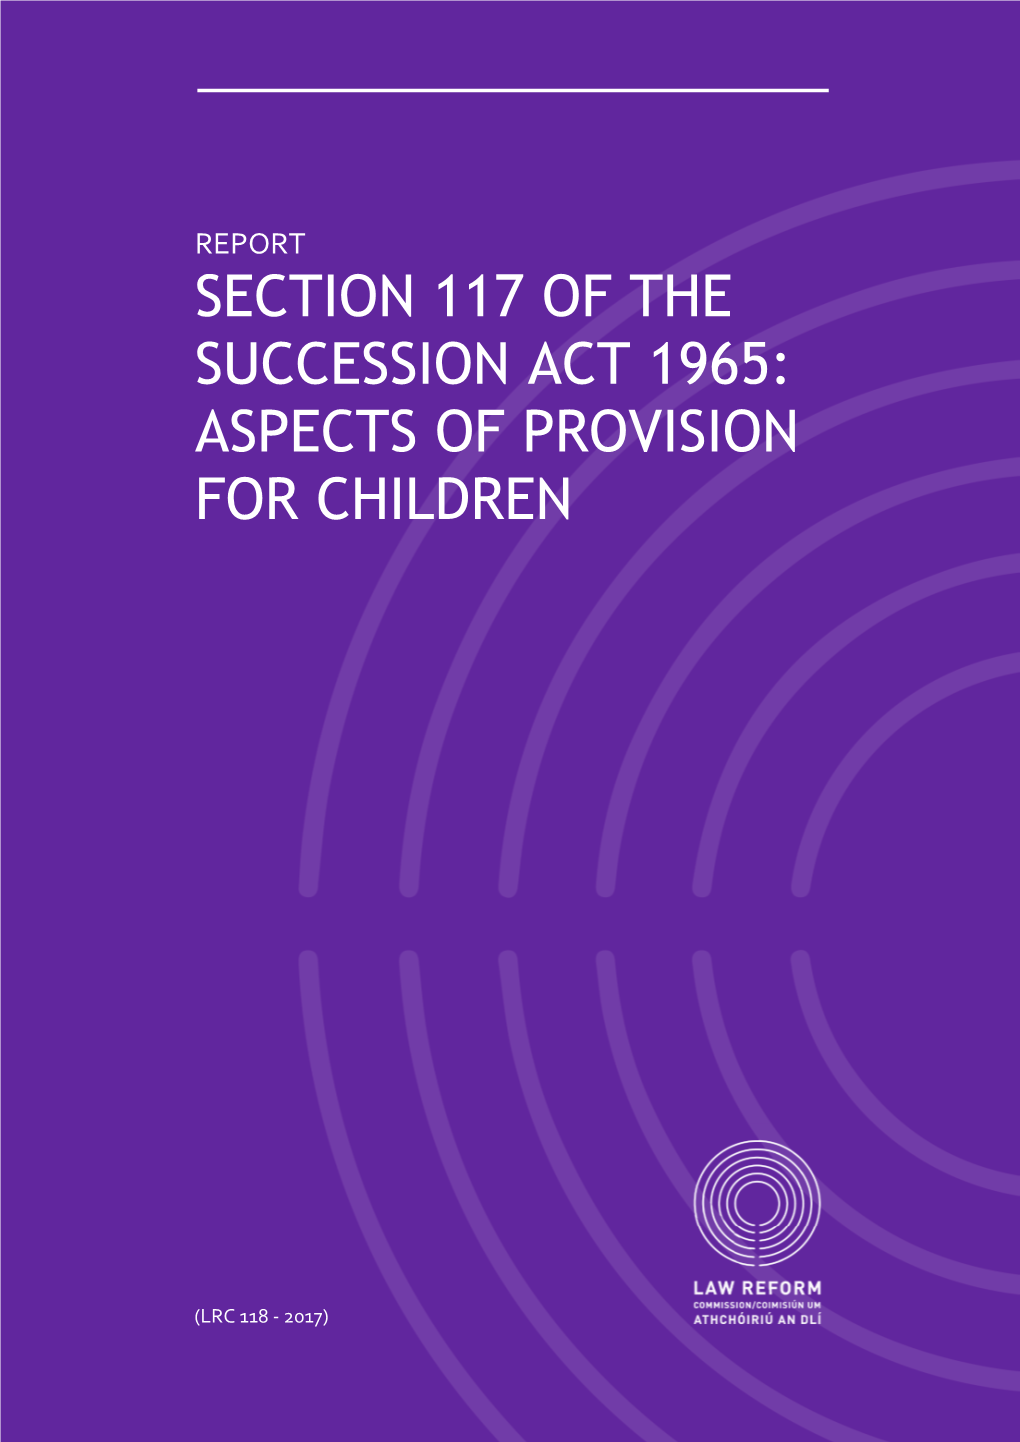 REPORT on SECTION 117 of the SUCCESSION ACT 1965: ASPECTS of PROVISION for CHILDREN About the Law Reform Commission